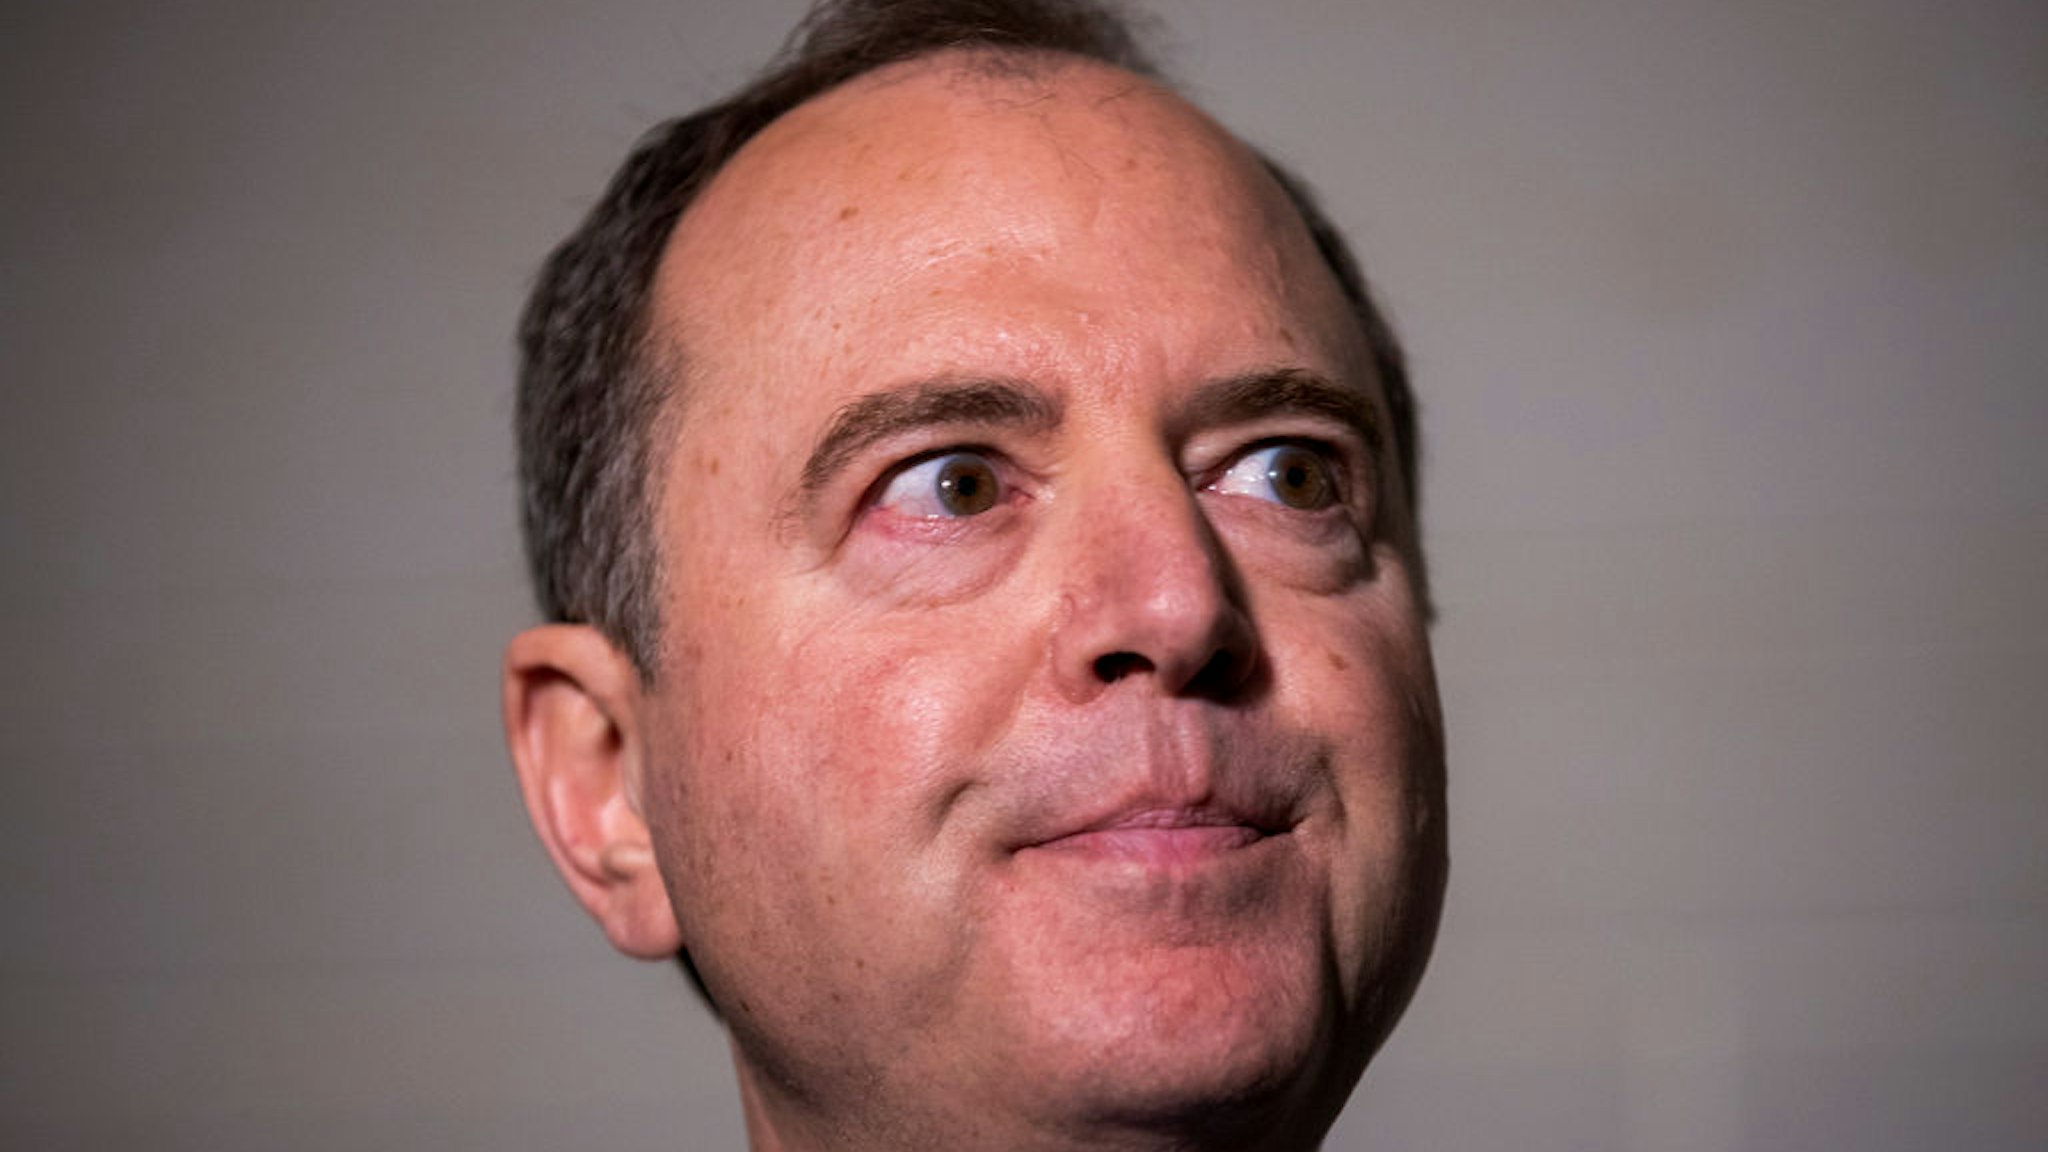 U.S. Rep. Adam Schiff (D-CA), Chairman of the House Select Committee on Intelligence Committee speaks at a press conference at the U.S. Capitol on October 08, 2019 in Washington, DC. Schiff spoke on reports that the Trump administration has blocked the testimony of U.S. Ambassador to the European Union Gordon Sondland in the House impeachment inquiry. (Photo by Tasos Katopodis/Getty Images)